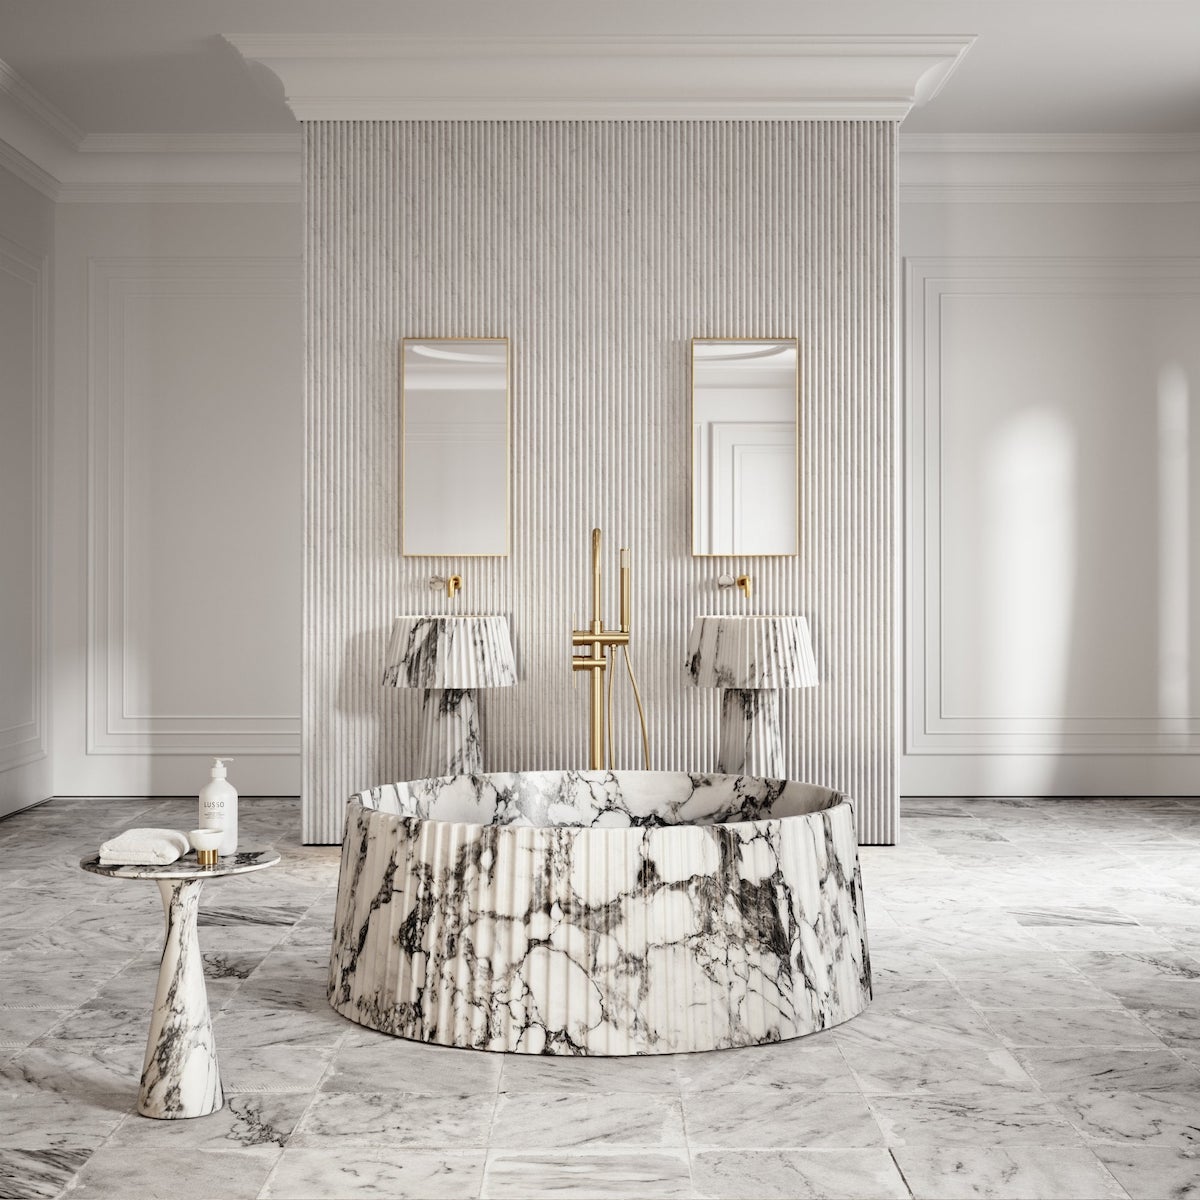 arabescato lamp basin and free standing bath - both marble inspired